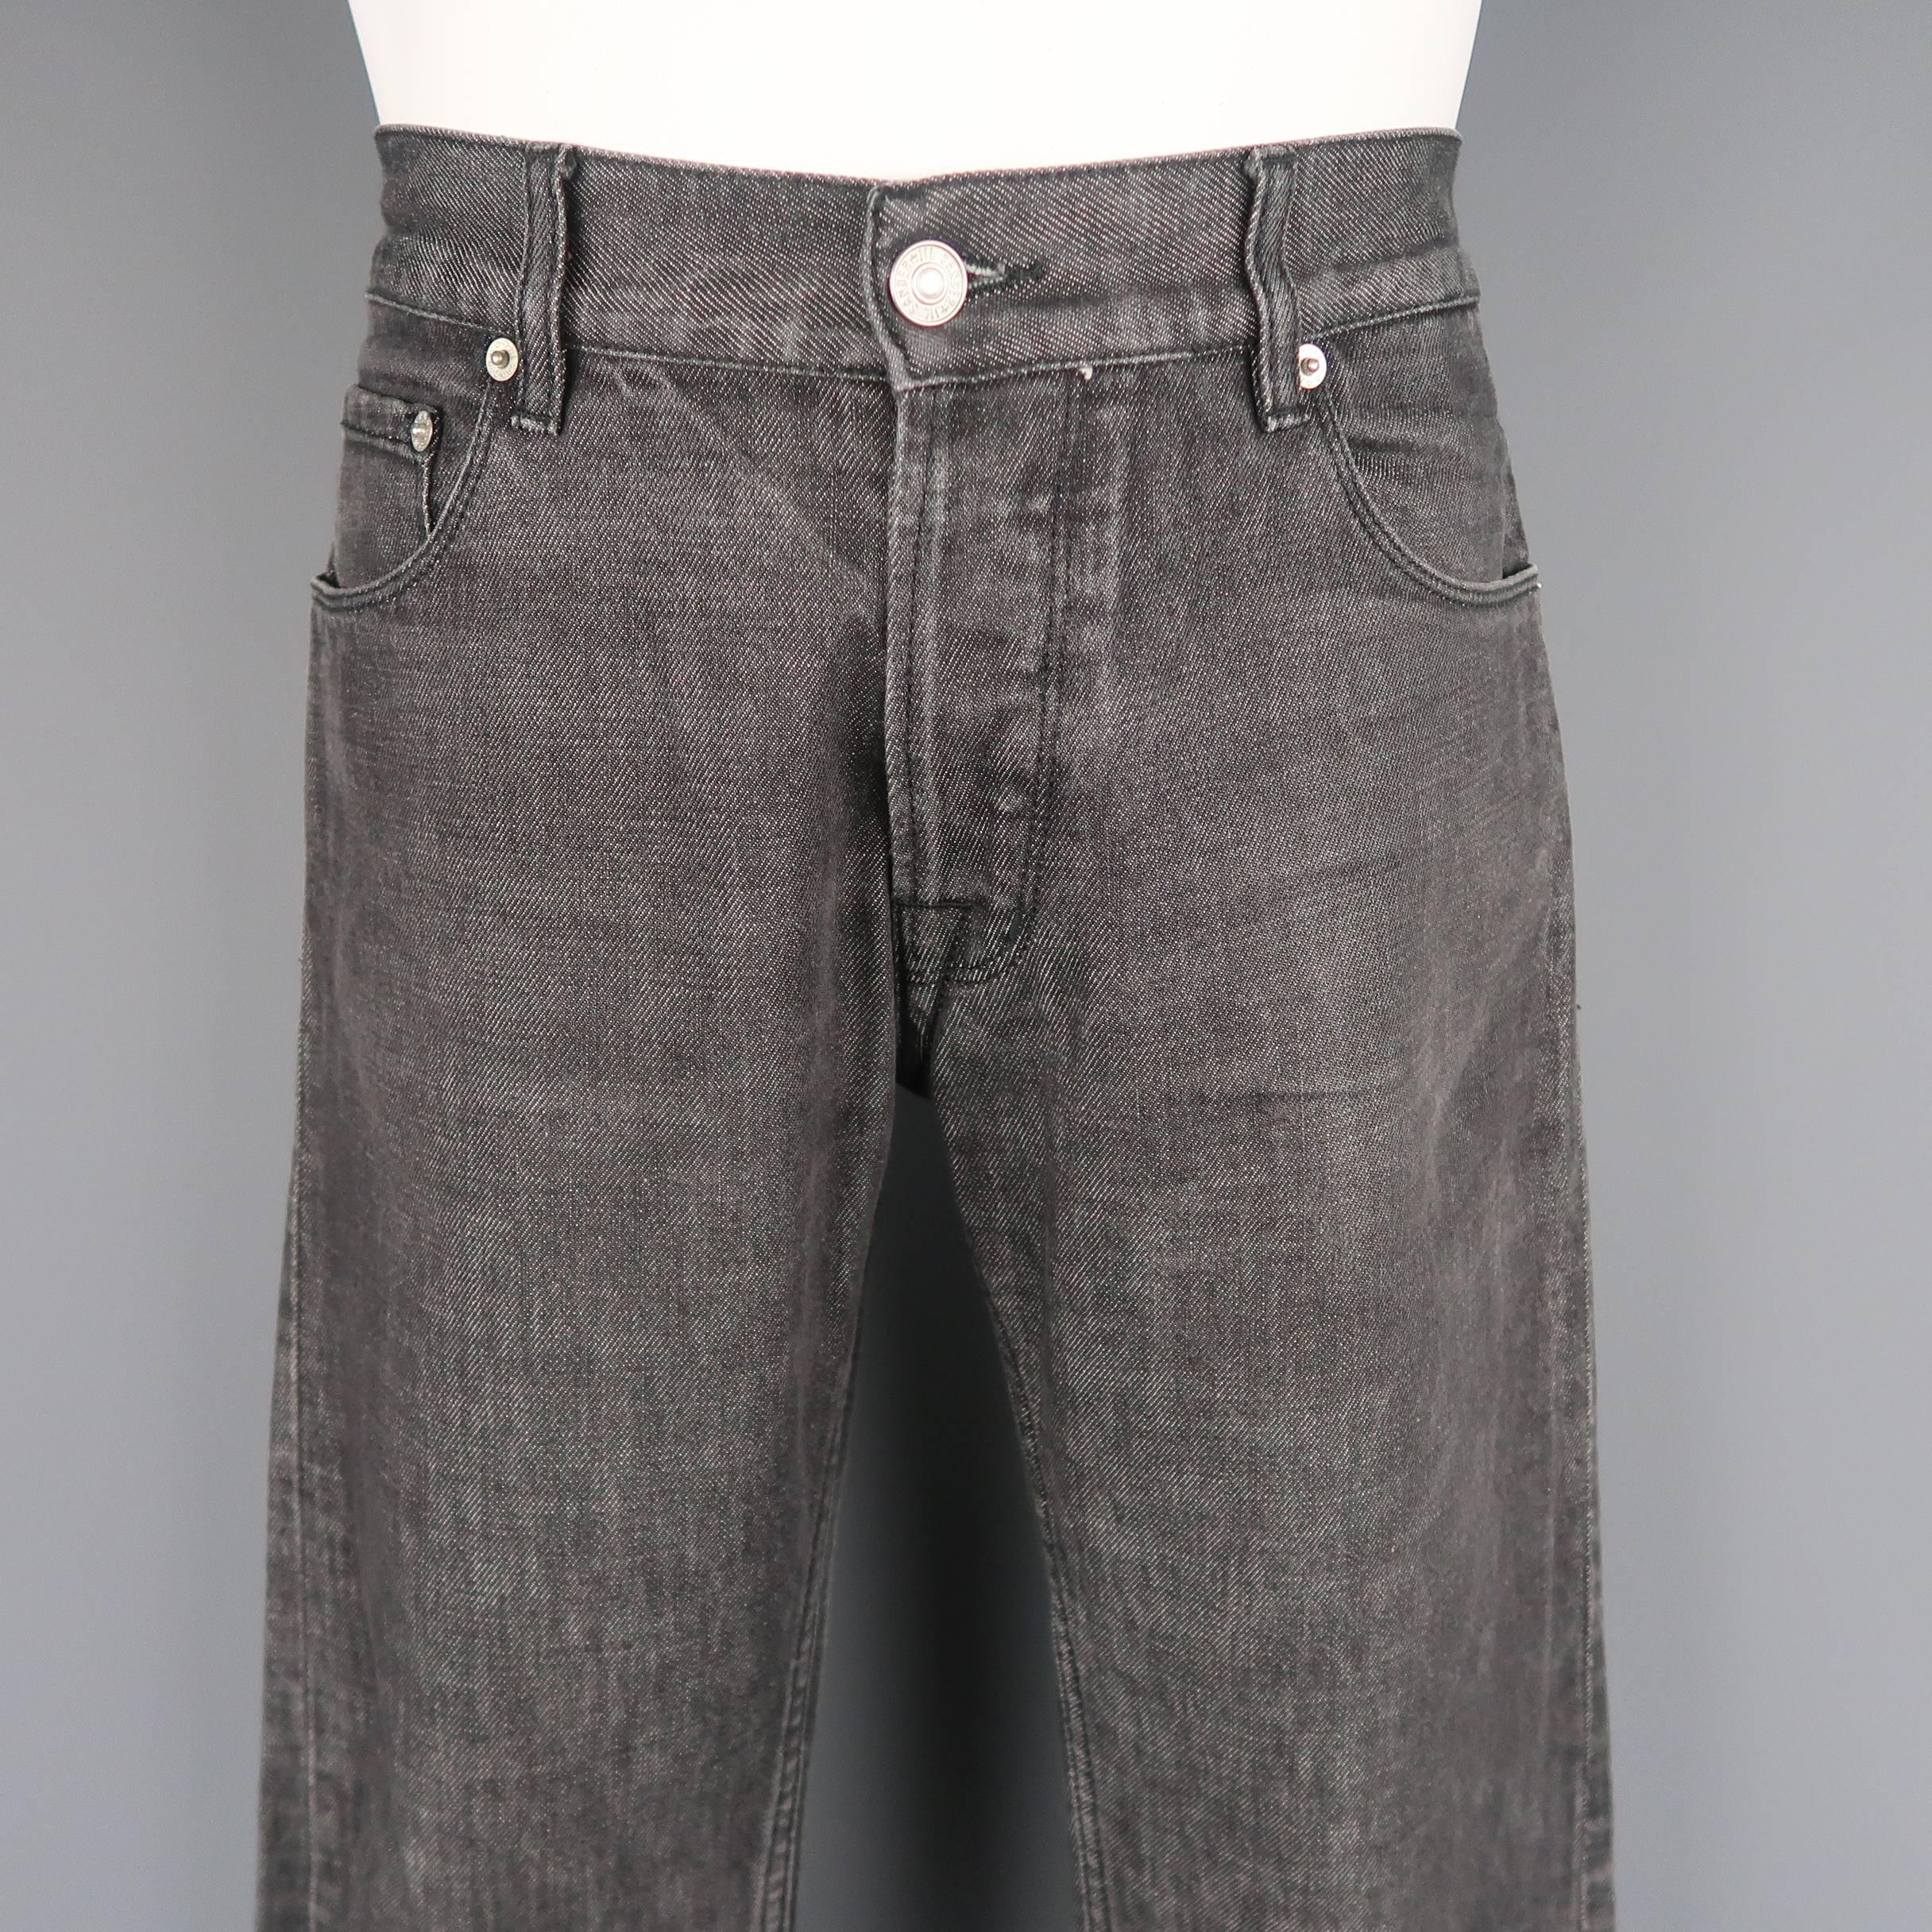 JIL SANDER jeans come in charcoal raw denim with silver tone hardware and a teal leather back patch. Made in Italy.
 
Good  Pre-Owned Condition.
Marked: 32
 
Measurements:
 
Waist: 33 in.
Rise: 9.5 in.
Inseam: 32 in.
